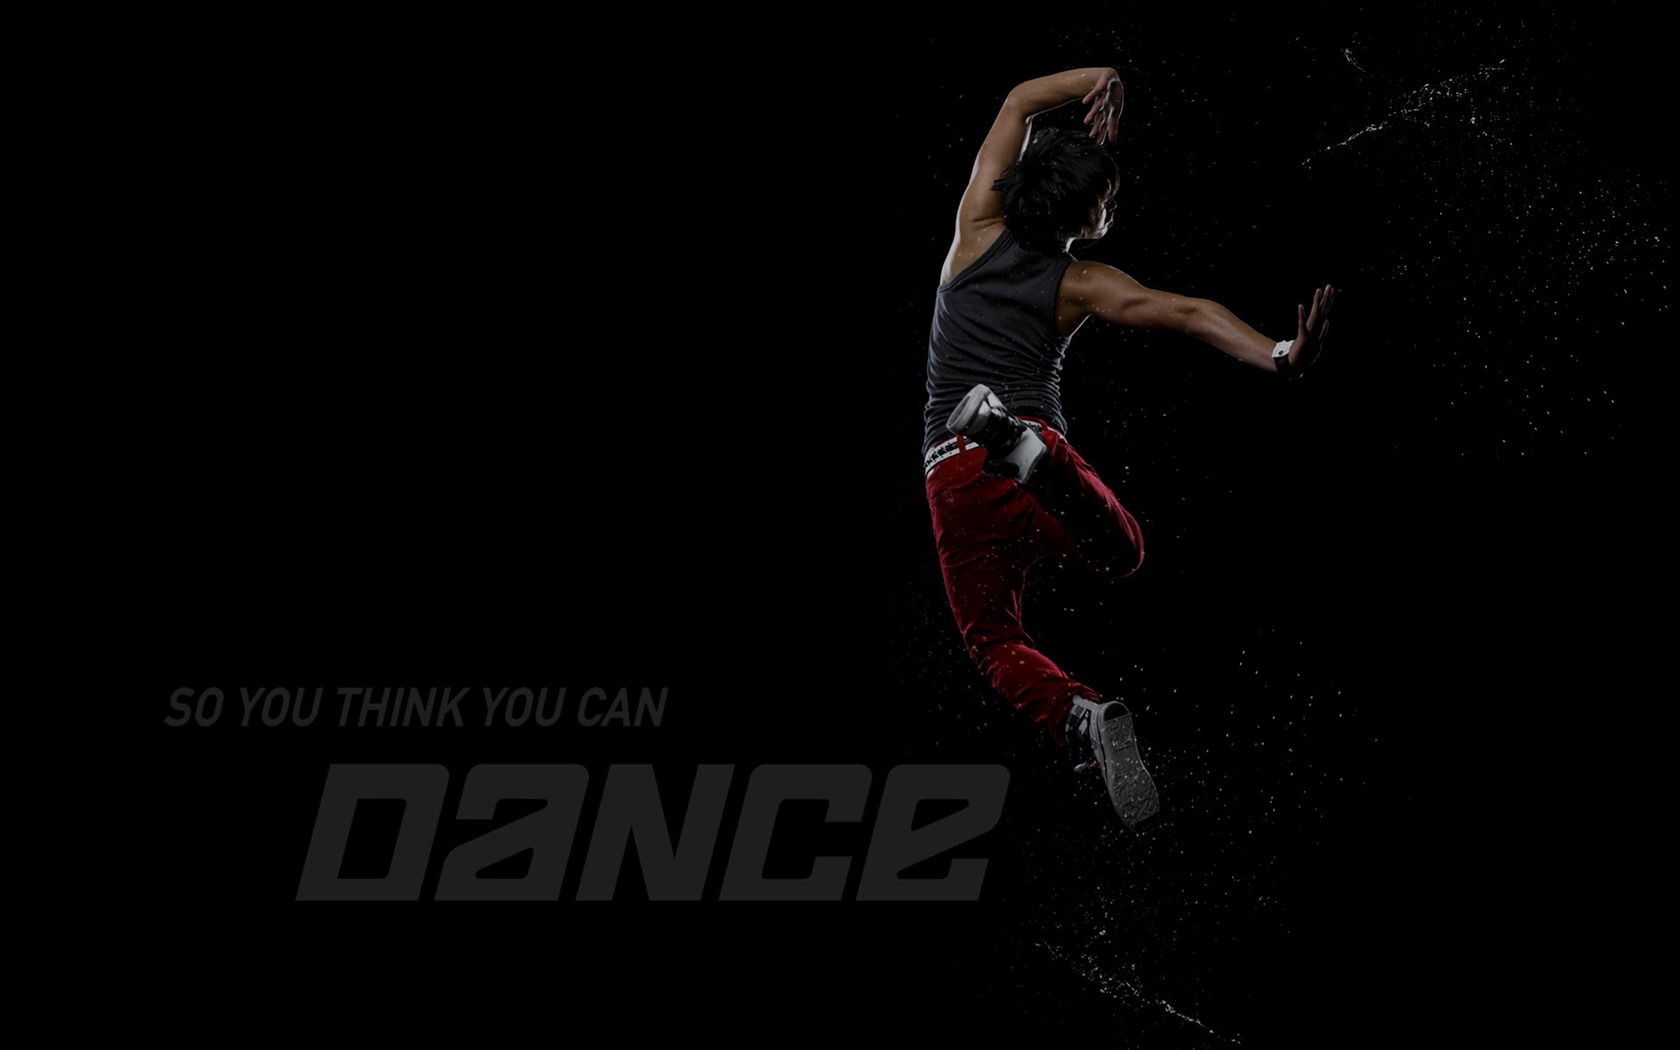 So You Think You Can Dance 舞林爭霸壁紙(二) #12 - 1680x1050